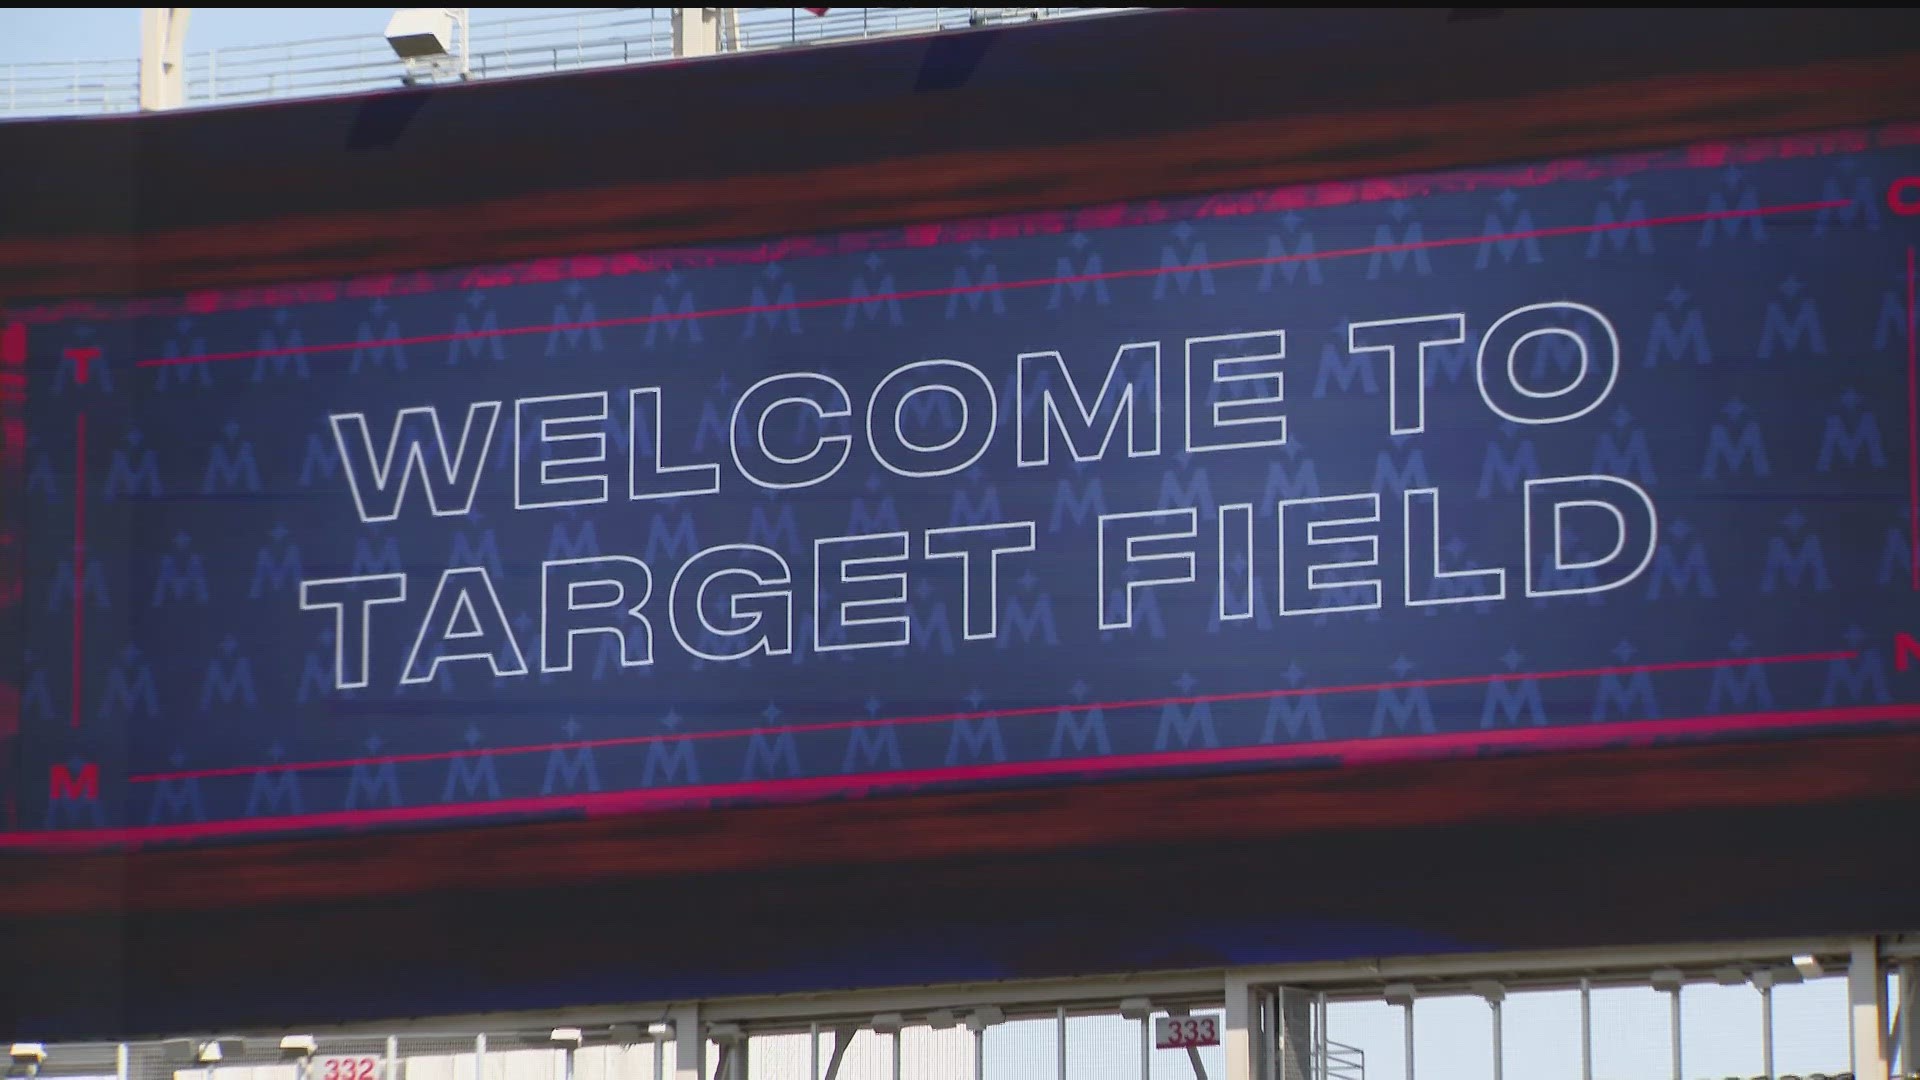 Twins fans showed up to Target Field Friday to welcome home the boys of summer in their Opening Day game against the Astros.